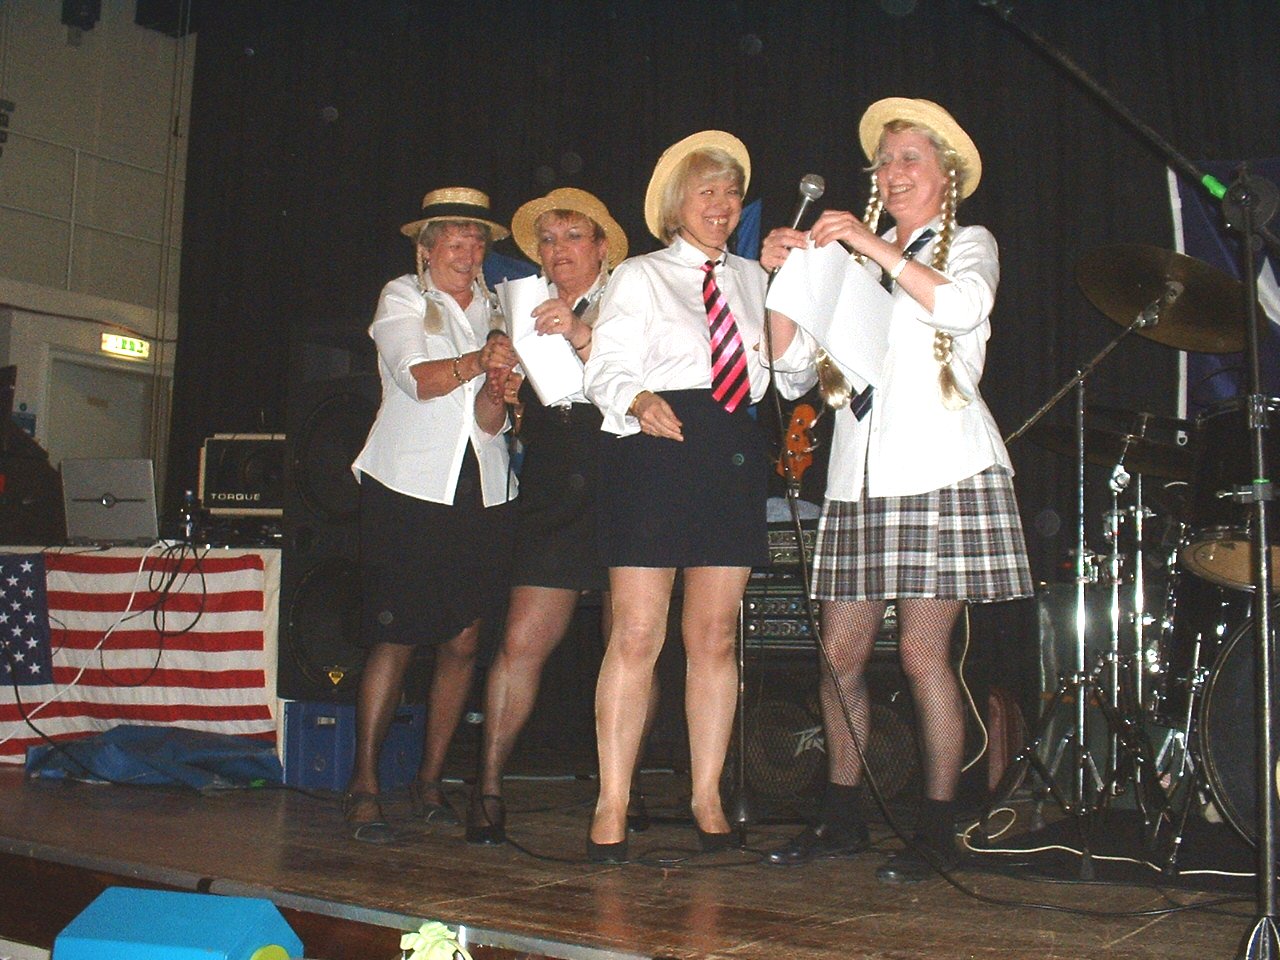 Dixie Belles, Marlene, Faye, Gill and Jenny singing "I Can't Be Bothered"